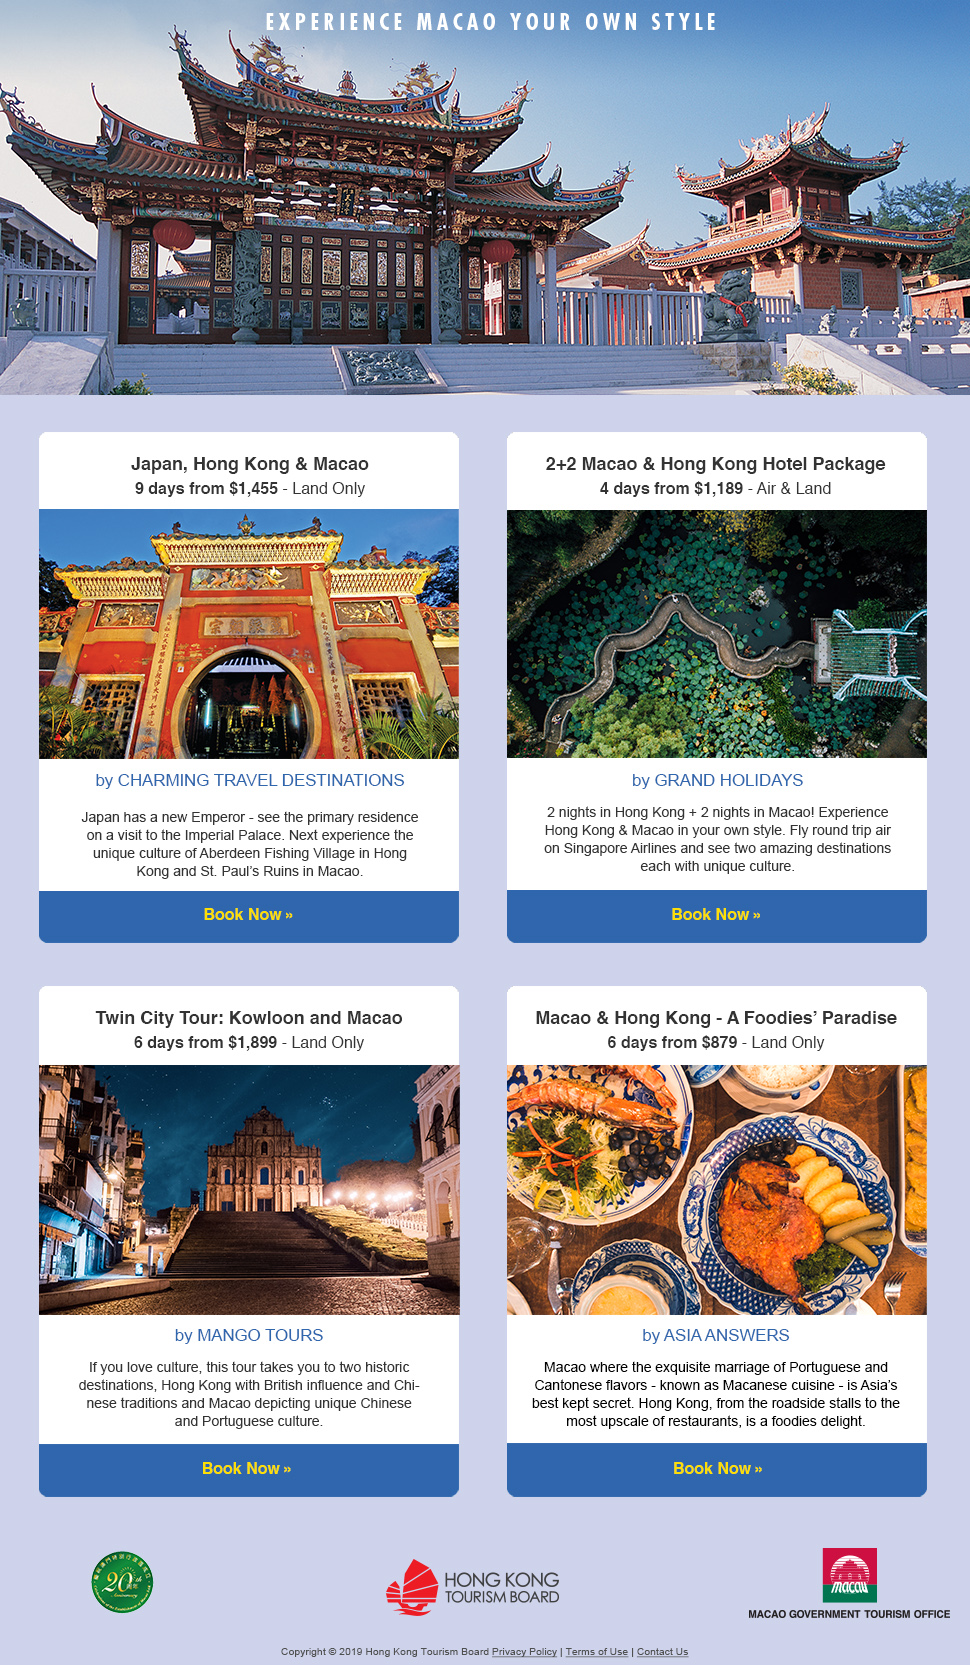 Experience Macao Your Own Style